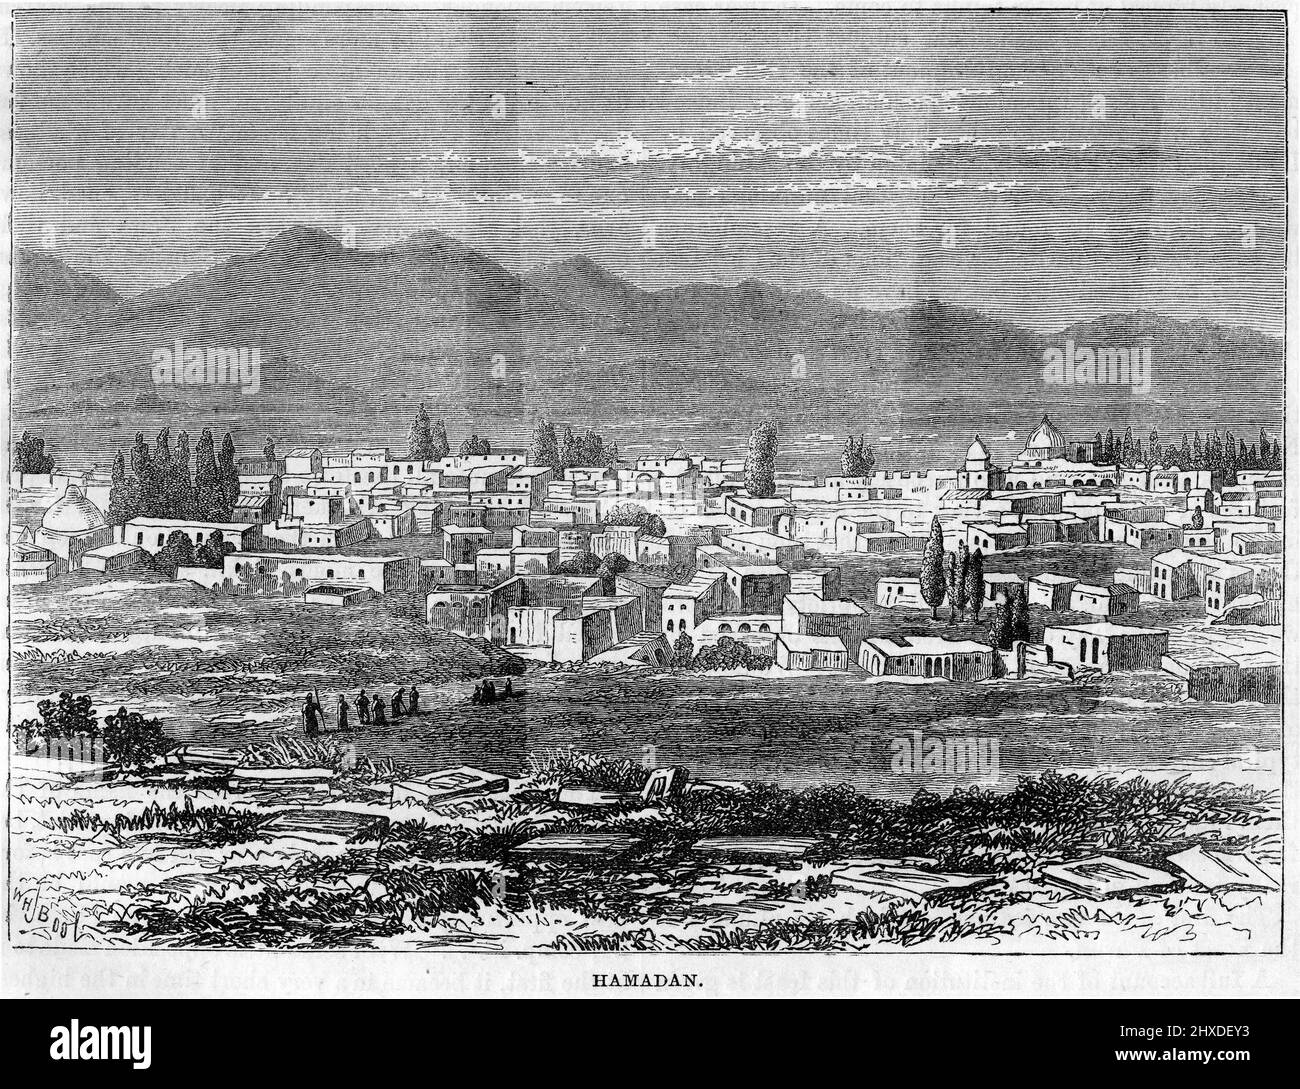 Engraving of the city of Hamadan in modern Iran, capital city of the Medes around 700BC. Engraving circa 1880 Stock Photo